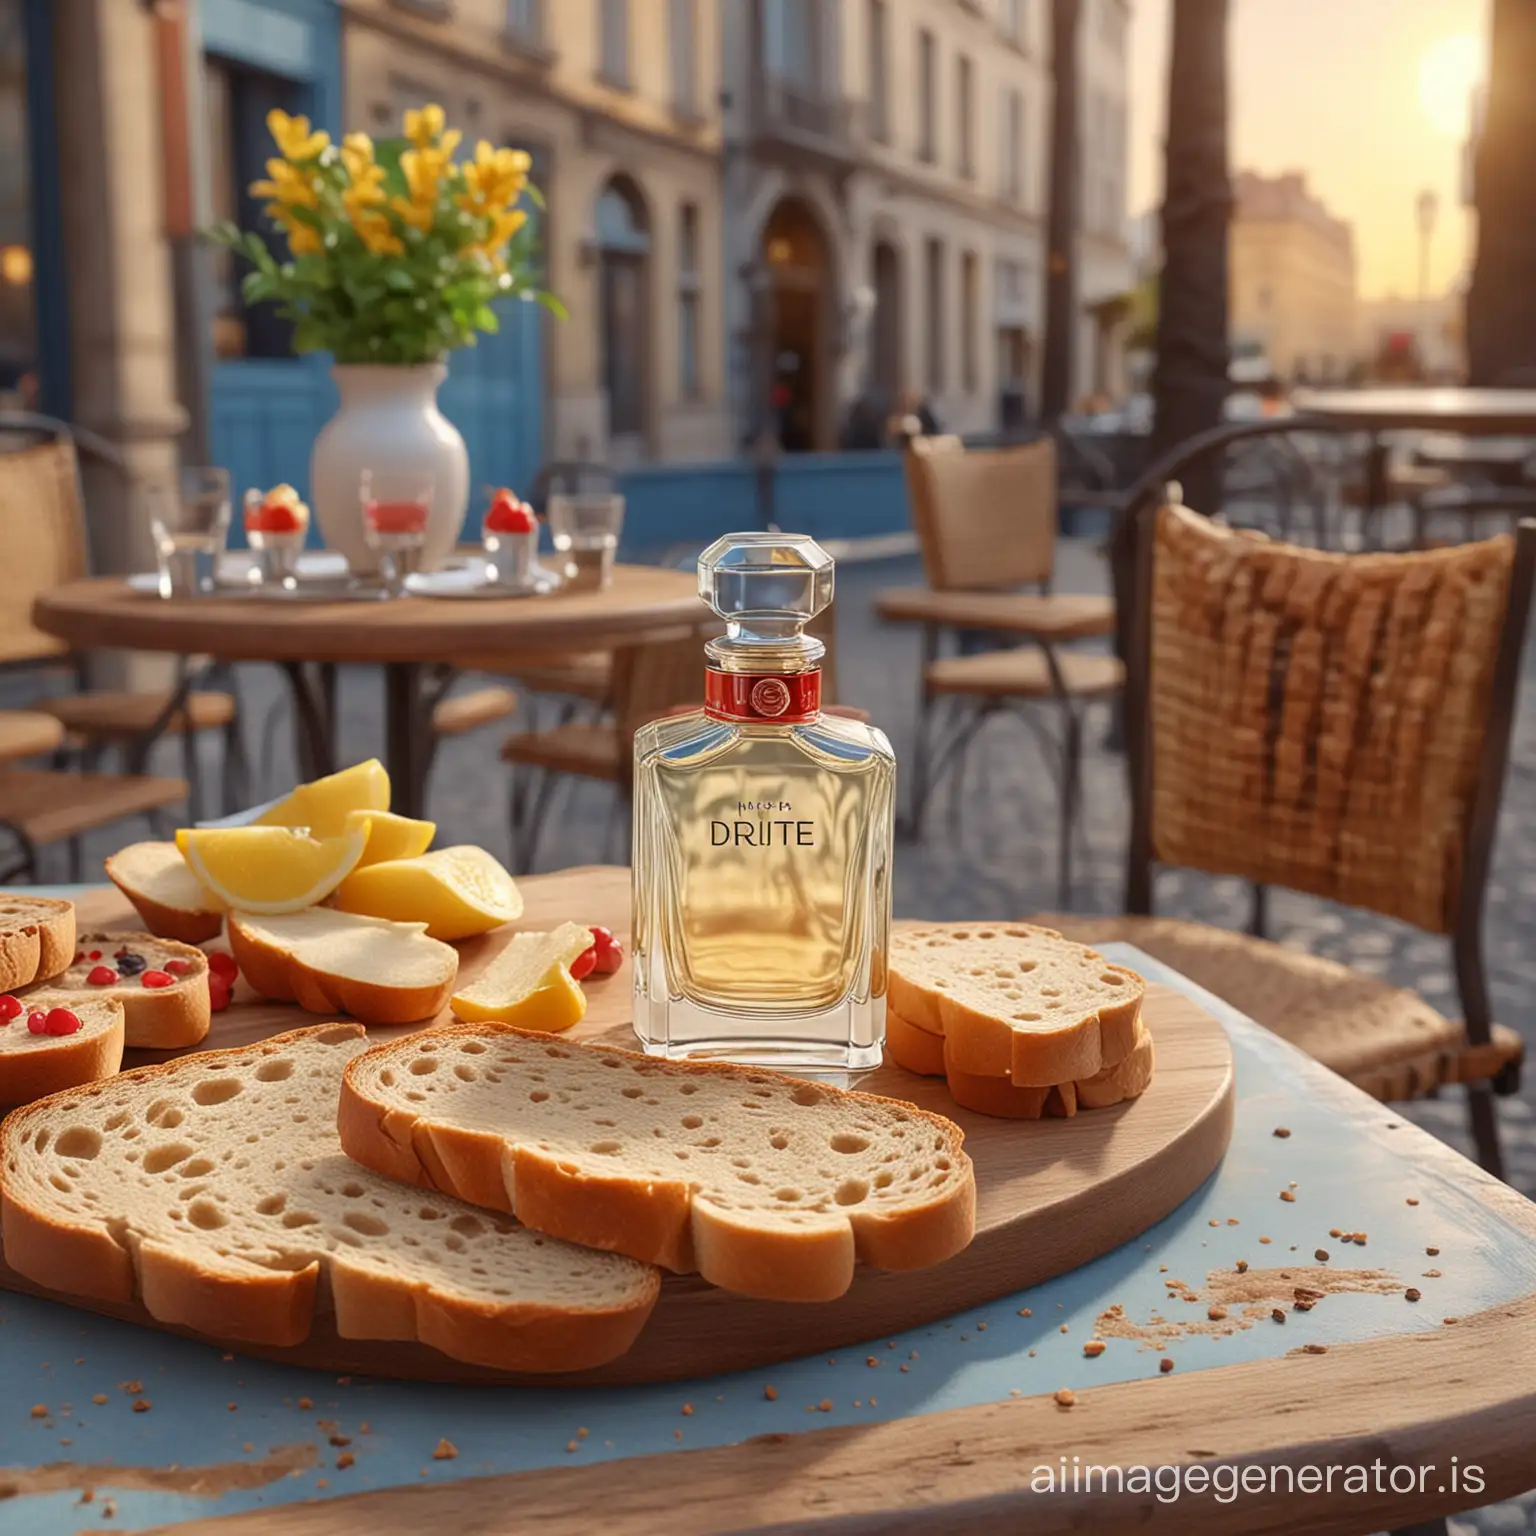 a hyper-realistic 3d rendering of a perfume product on a table, surrounded by baguette bread, grannysmith apple, lemon, red berries, and Paris bread with a background of chairs and tables in a cafe in a warm daytime atmosphere blue orange sky